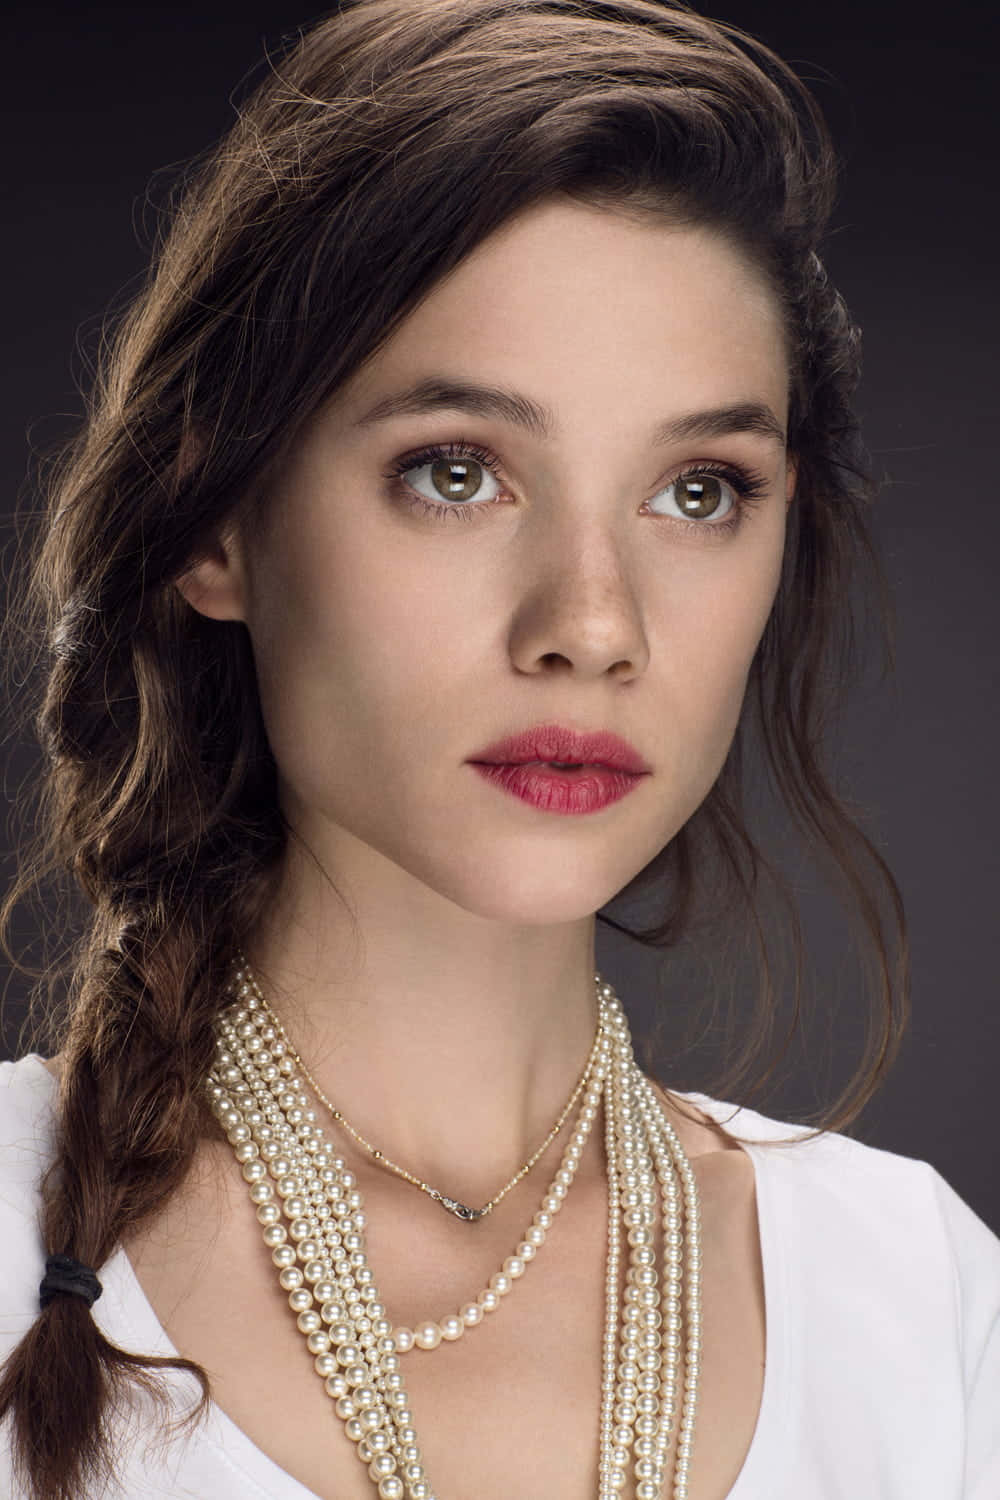 Astrid Berges-Frisbey posing elegantly at a photoshoot. Wallpaper